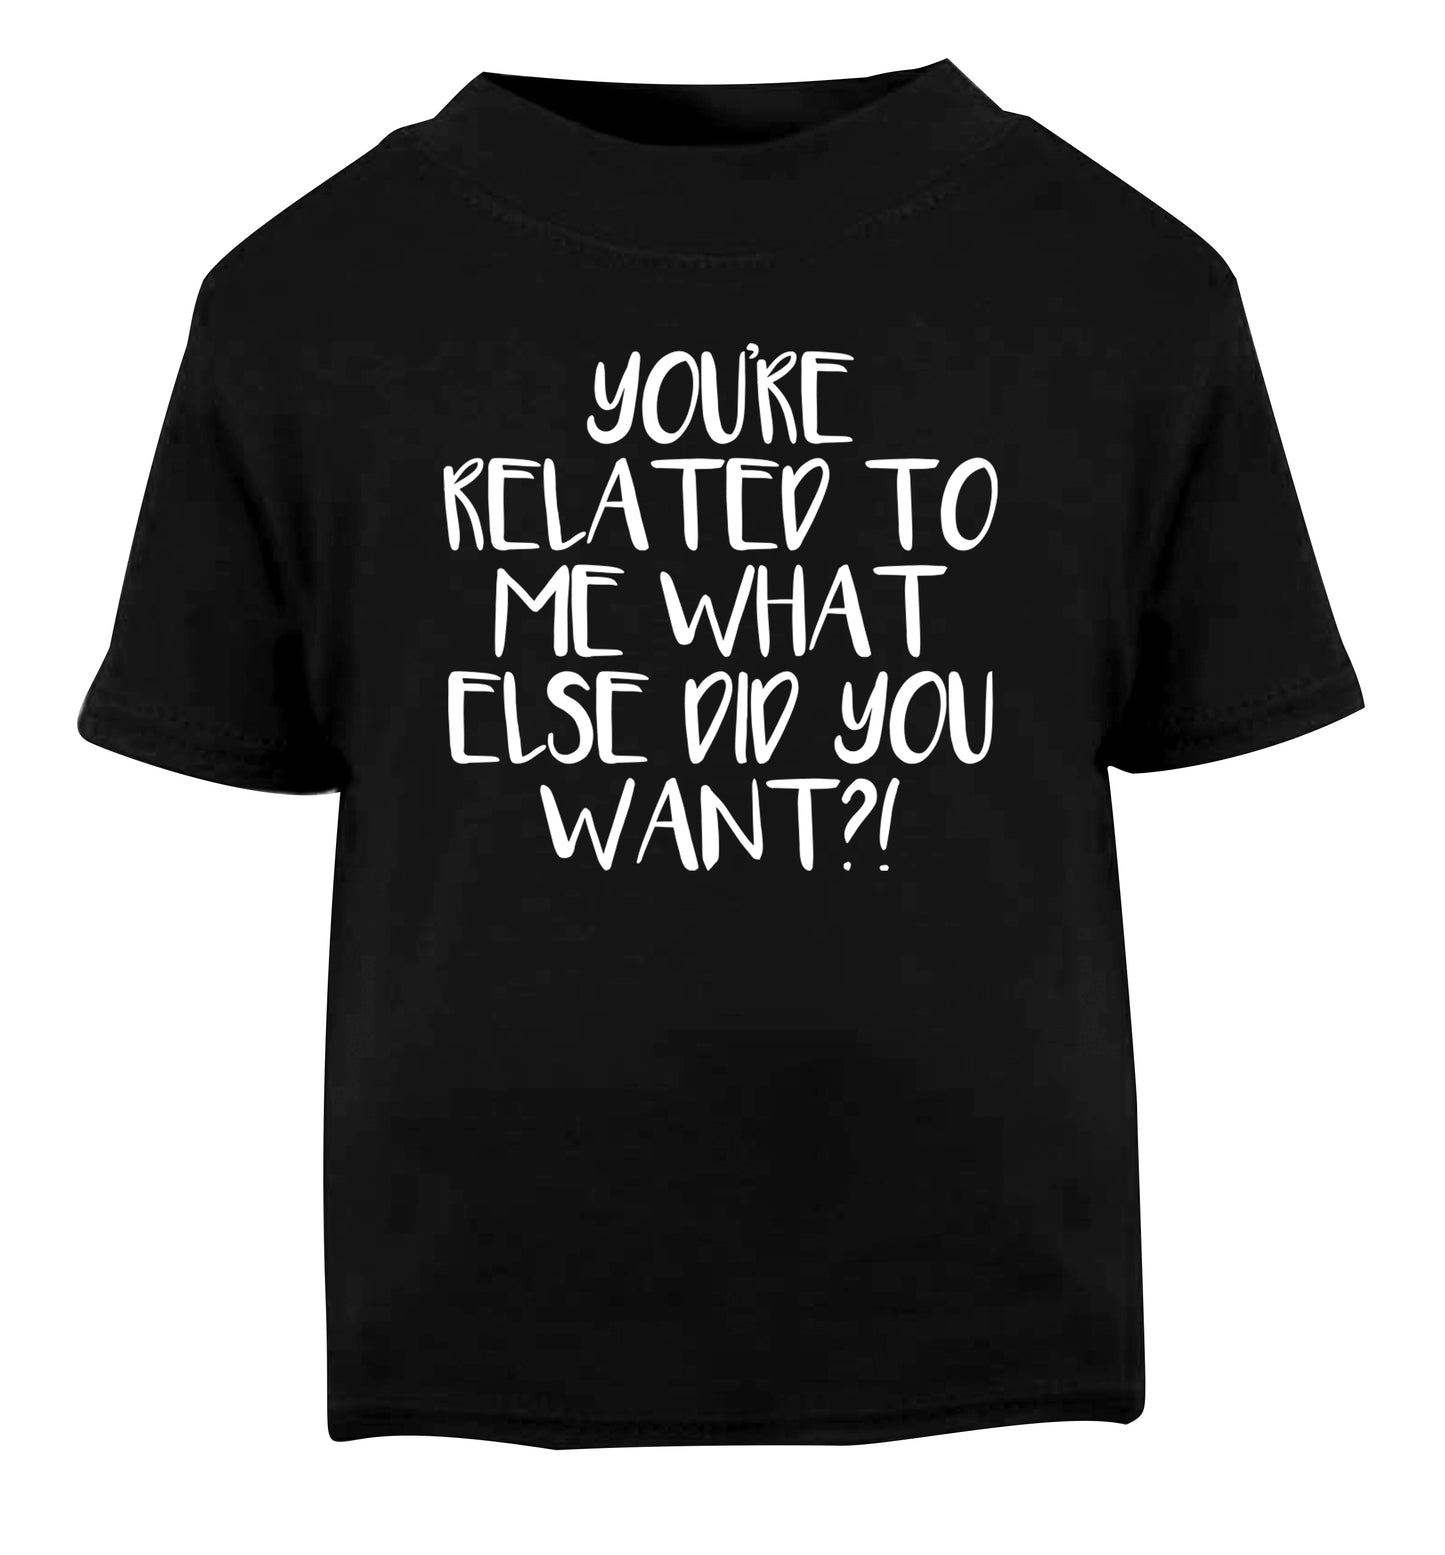 You're related to me what more do you want? Black Baby Toddler Tshirt 2 years